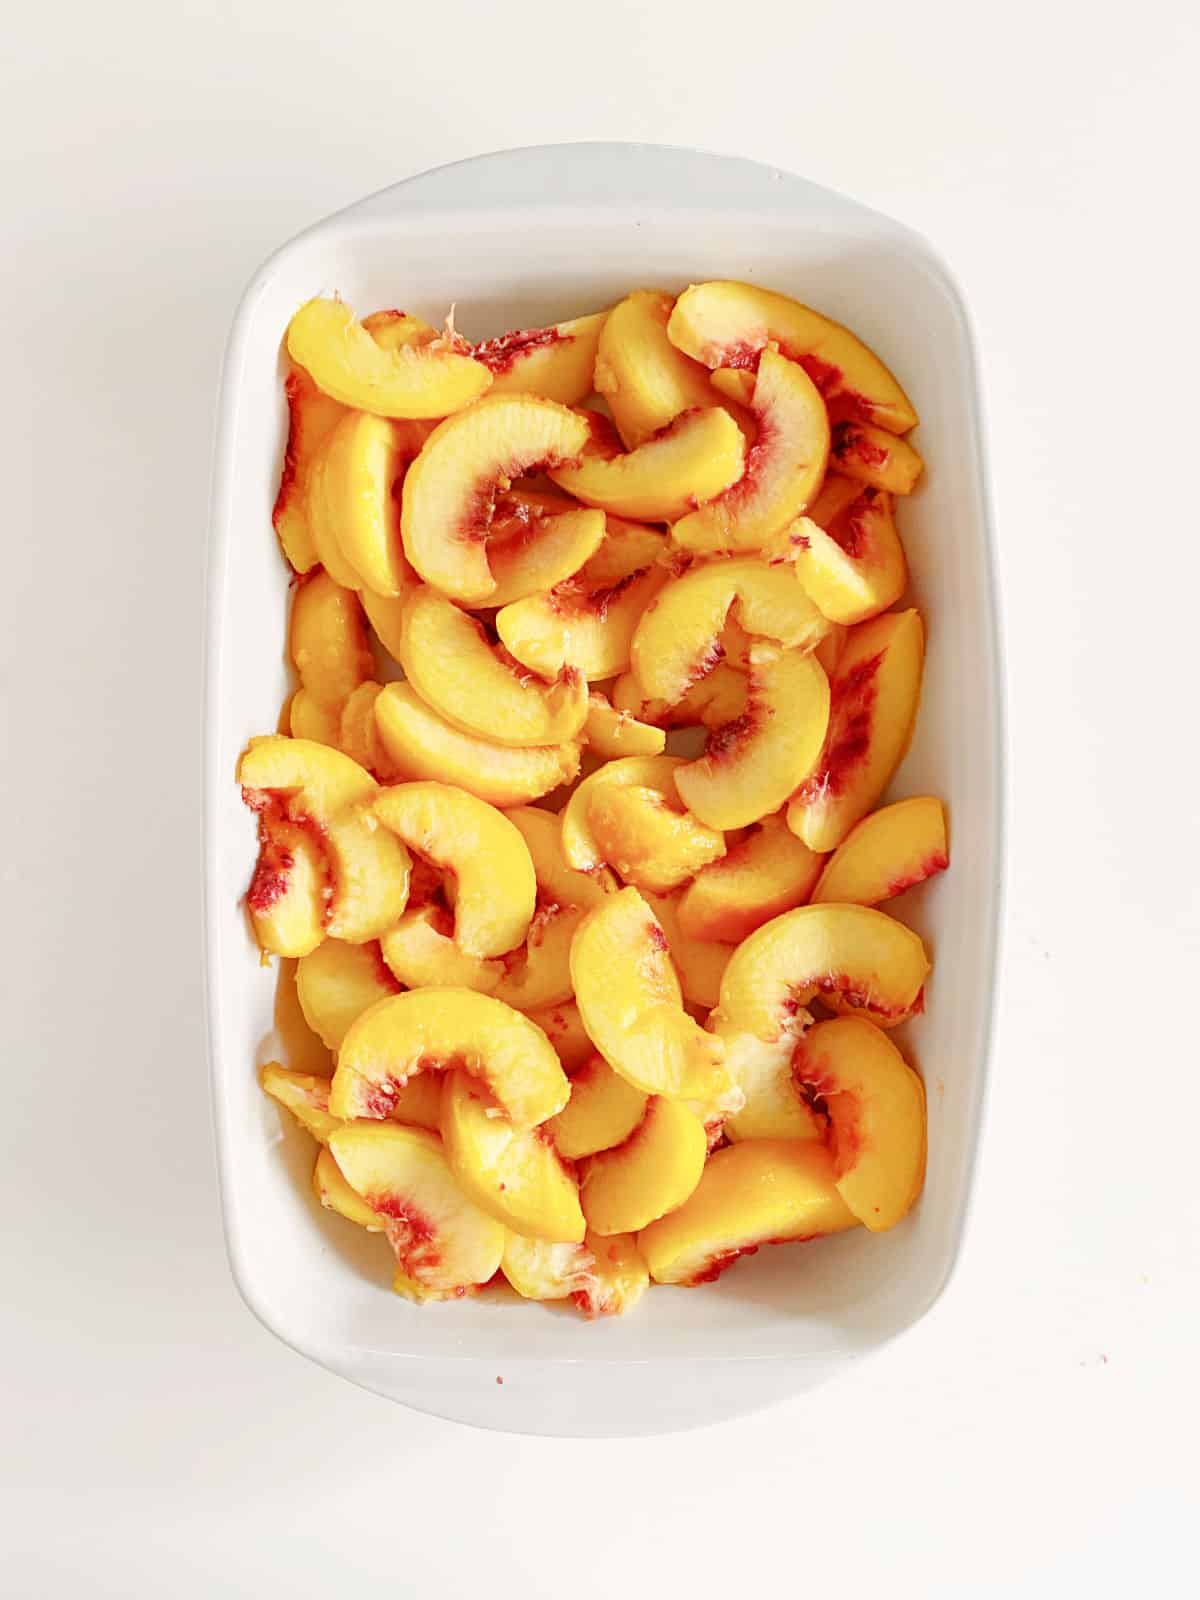 Top view of peach slices in rectangular white baking dish on a white surface.